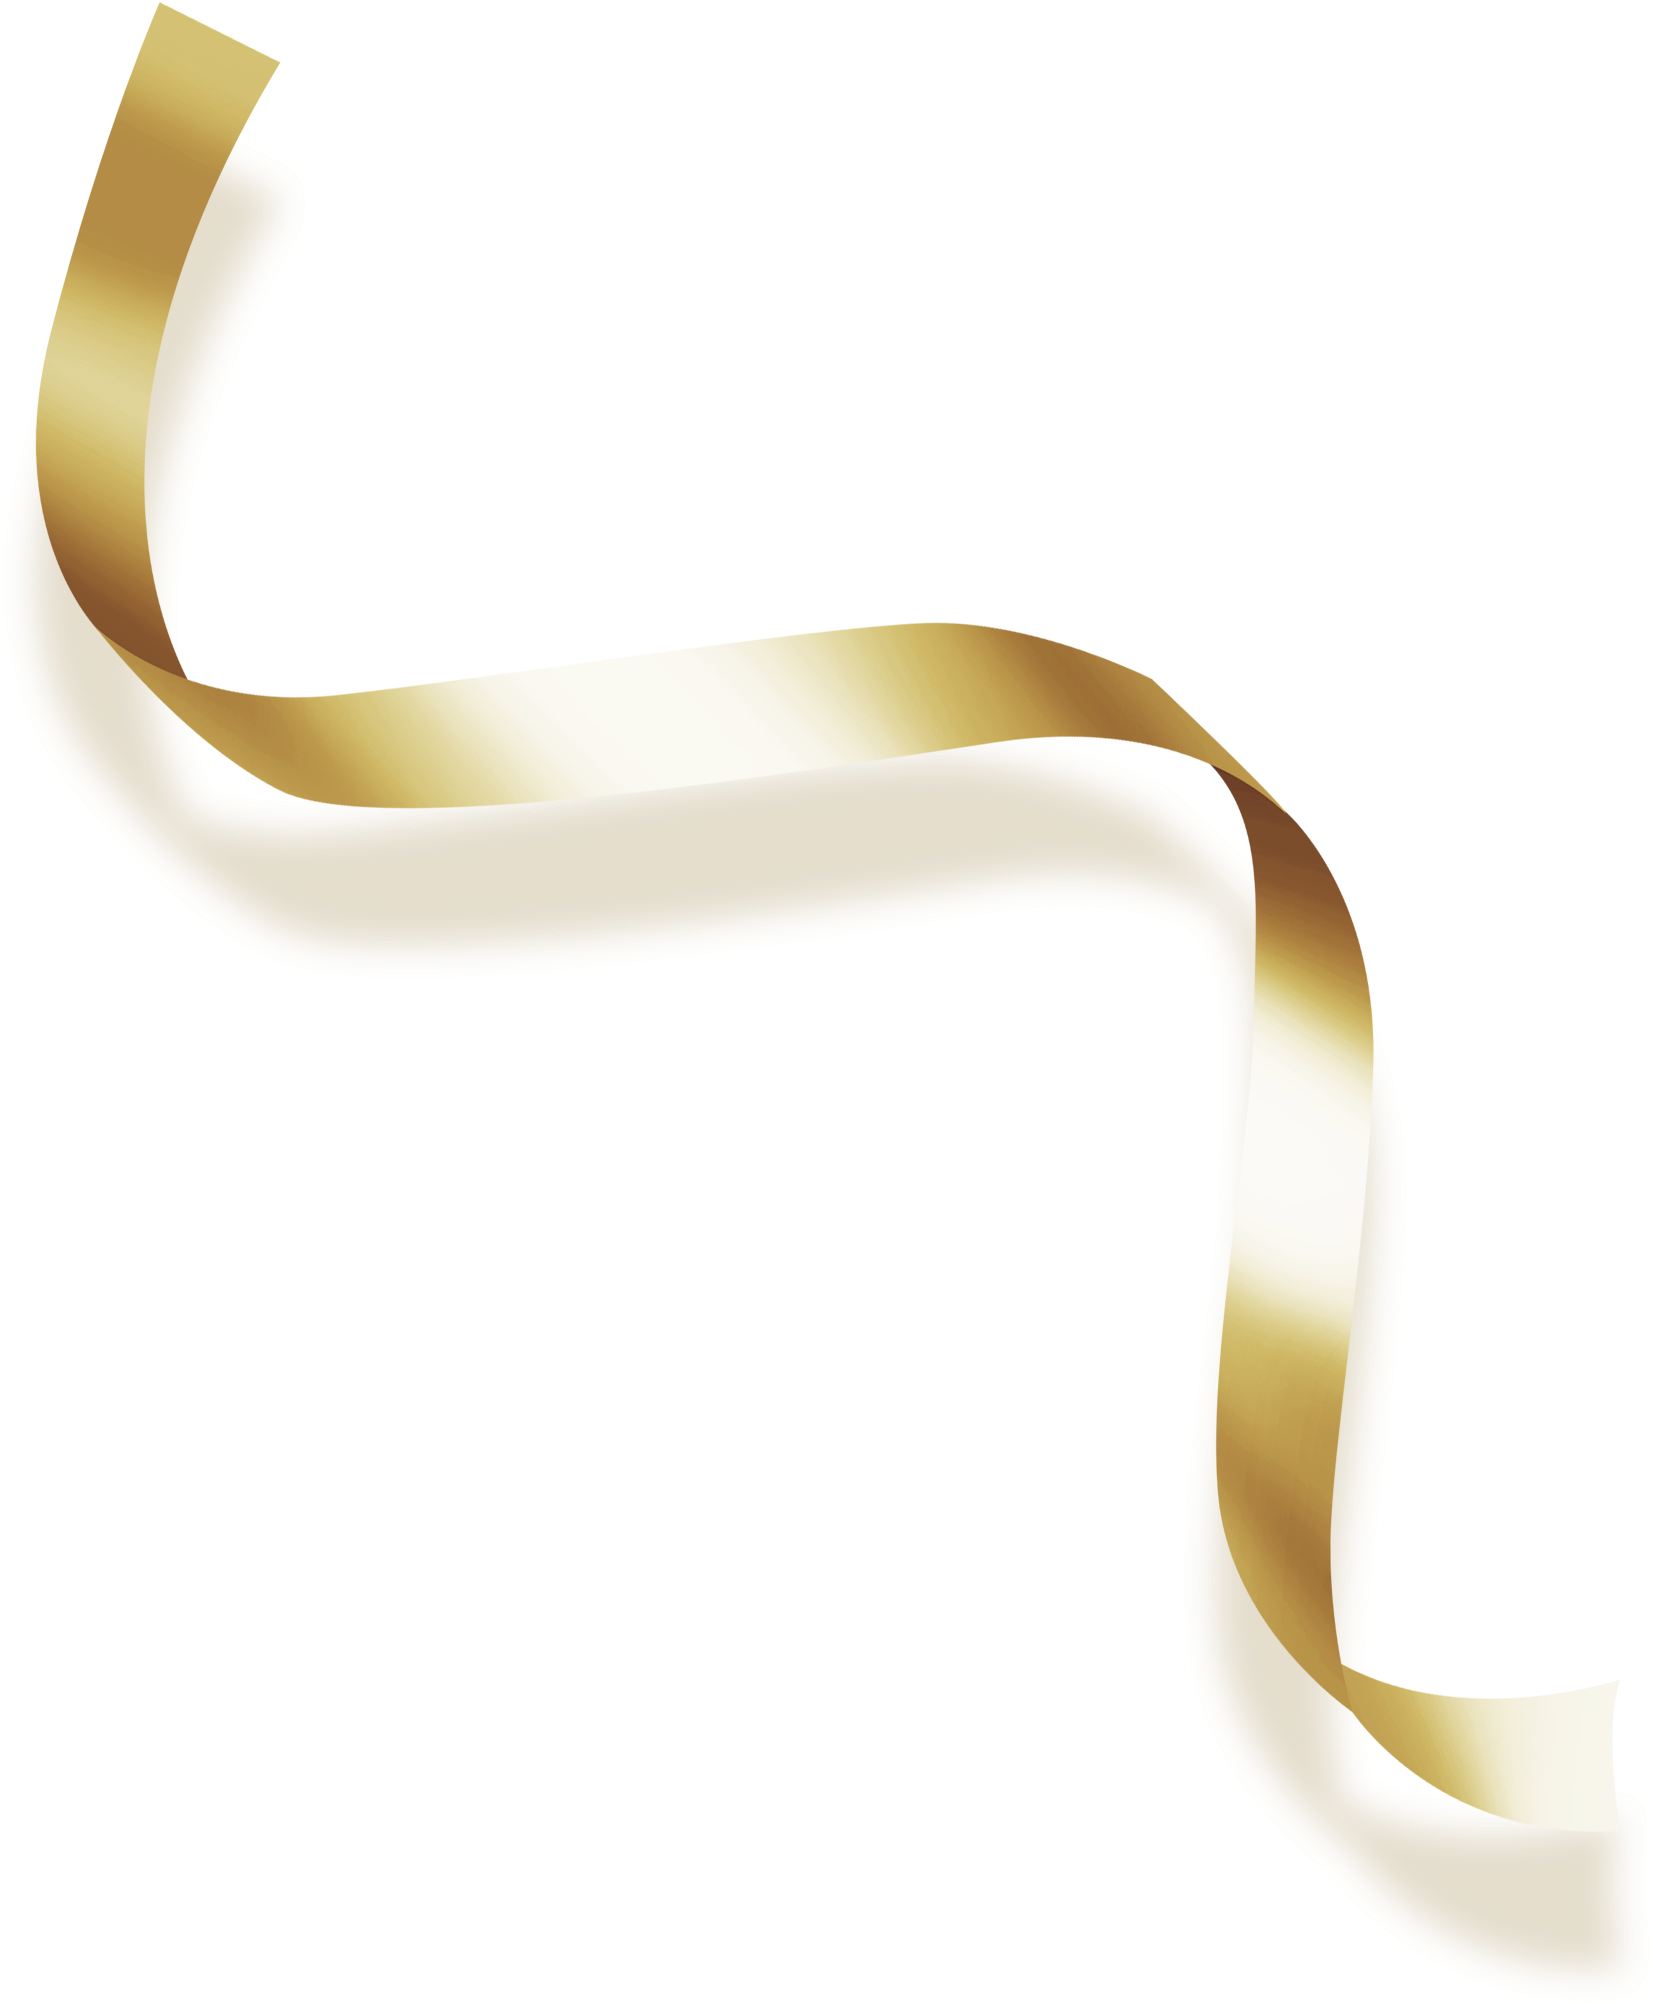 A Gold Ribbon On A Black Background